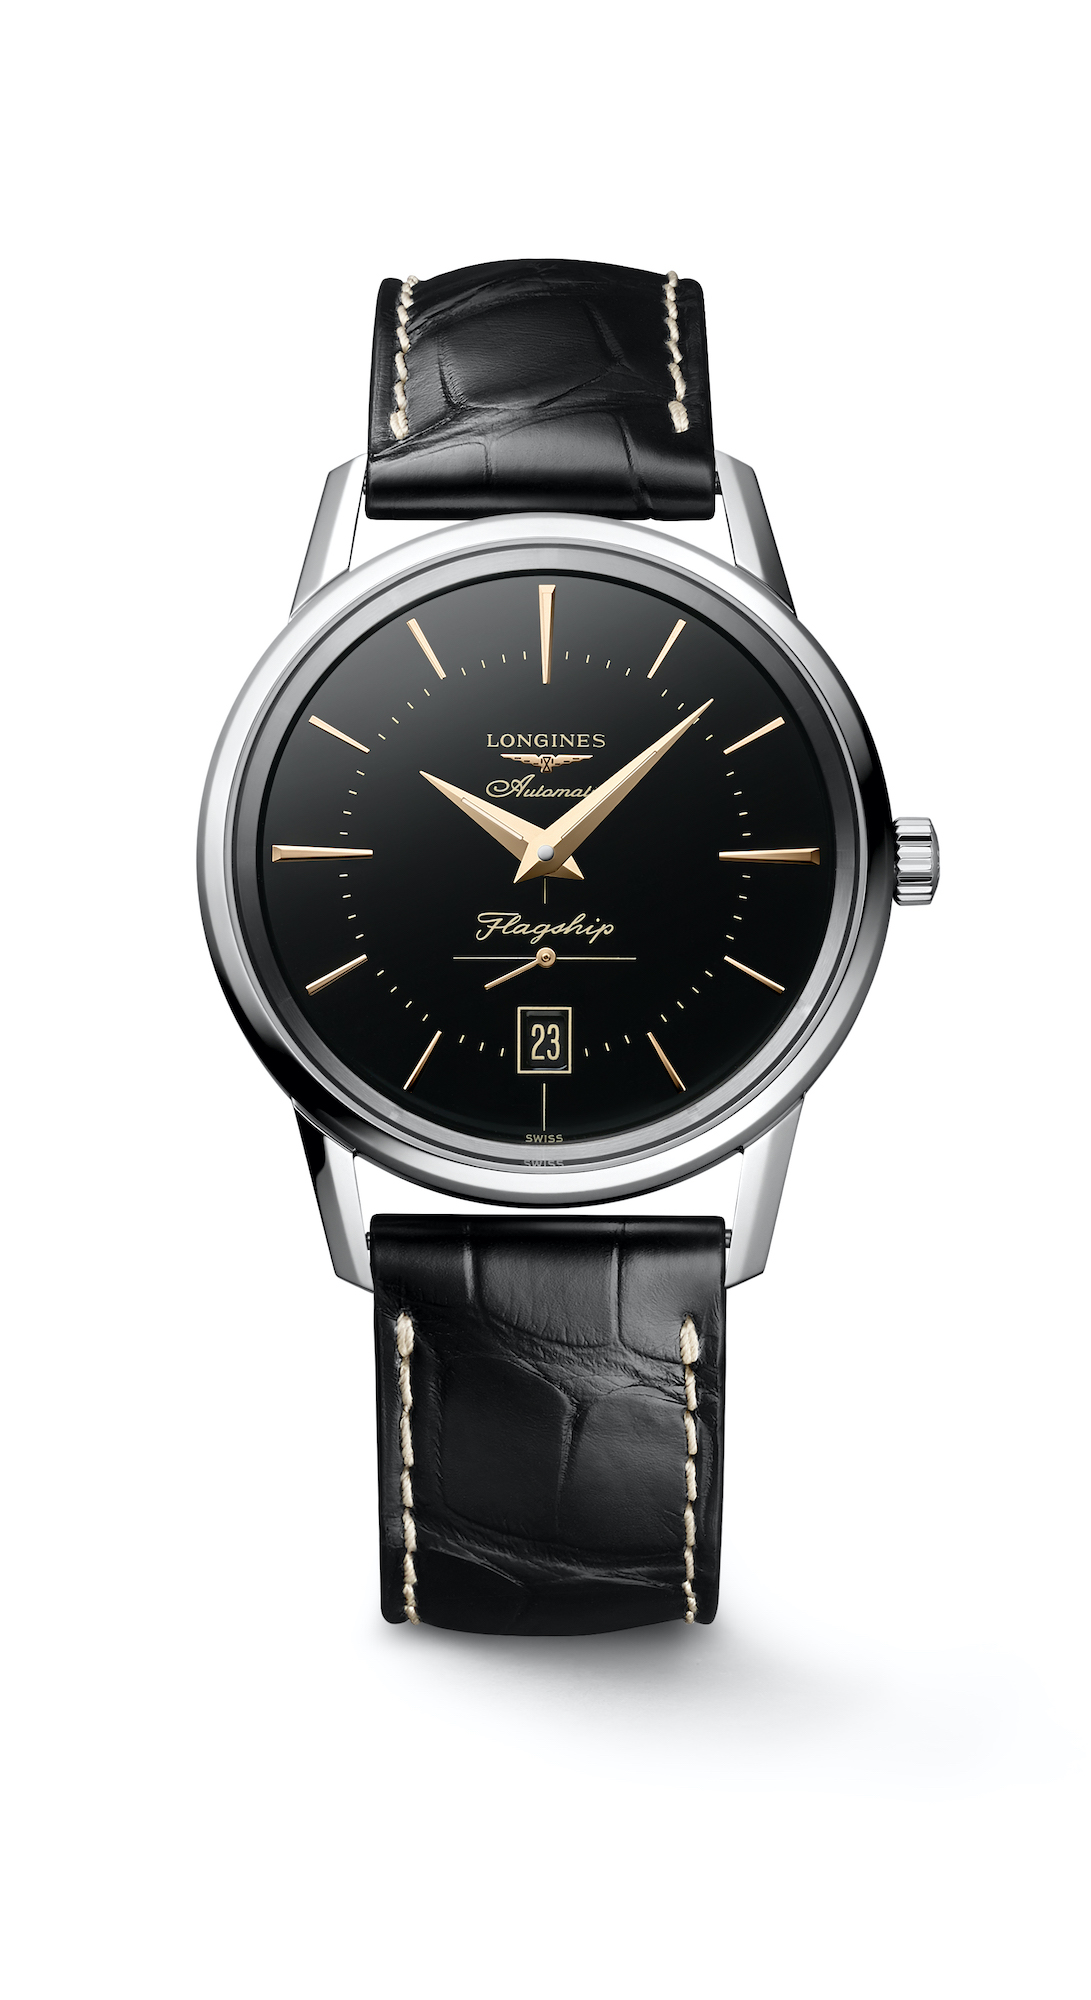 Longines Flagship Heritage L4.795.4.58.0 frontal